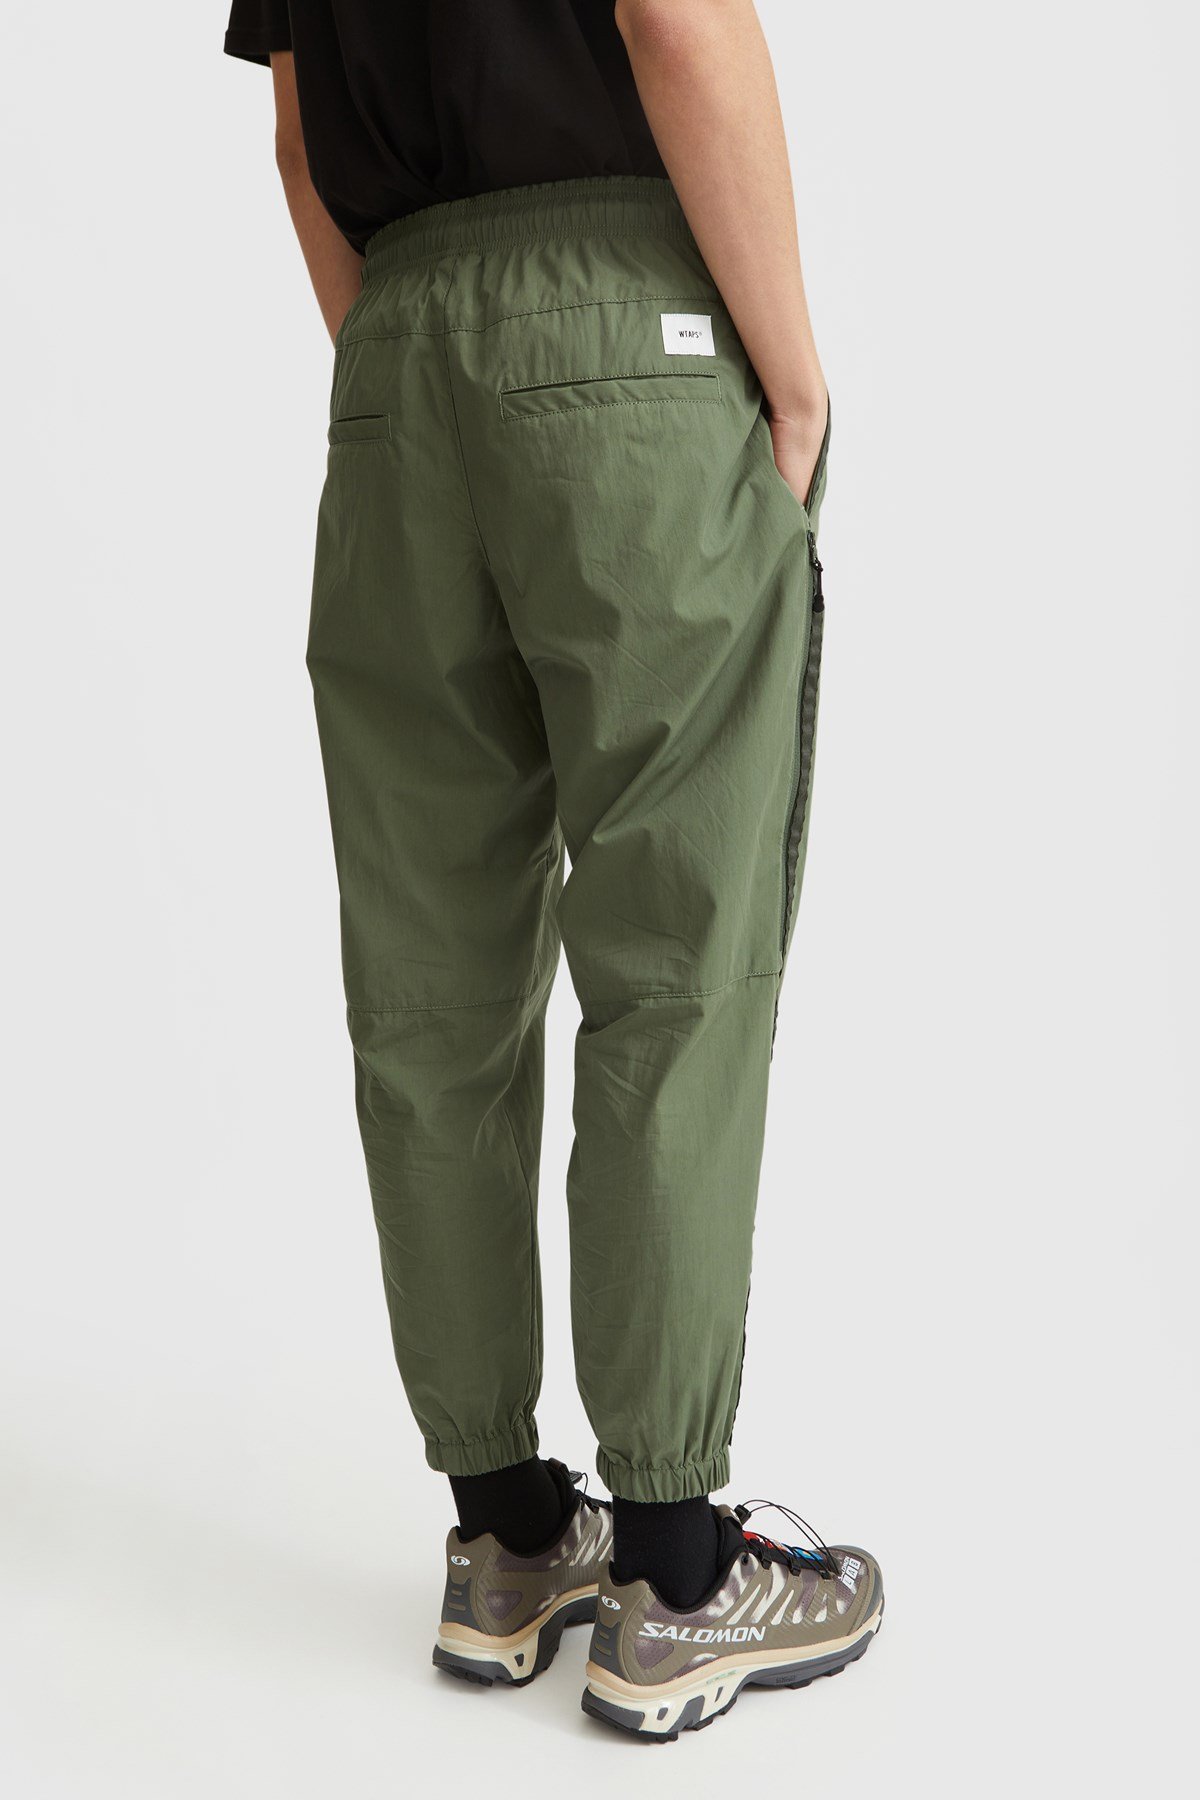 WTAPS Incom/Trousers / Nyco. Weather Olive drab | WoodWood.com